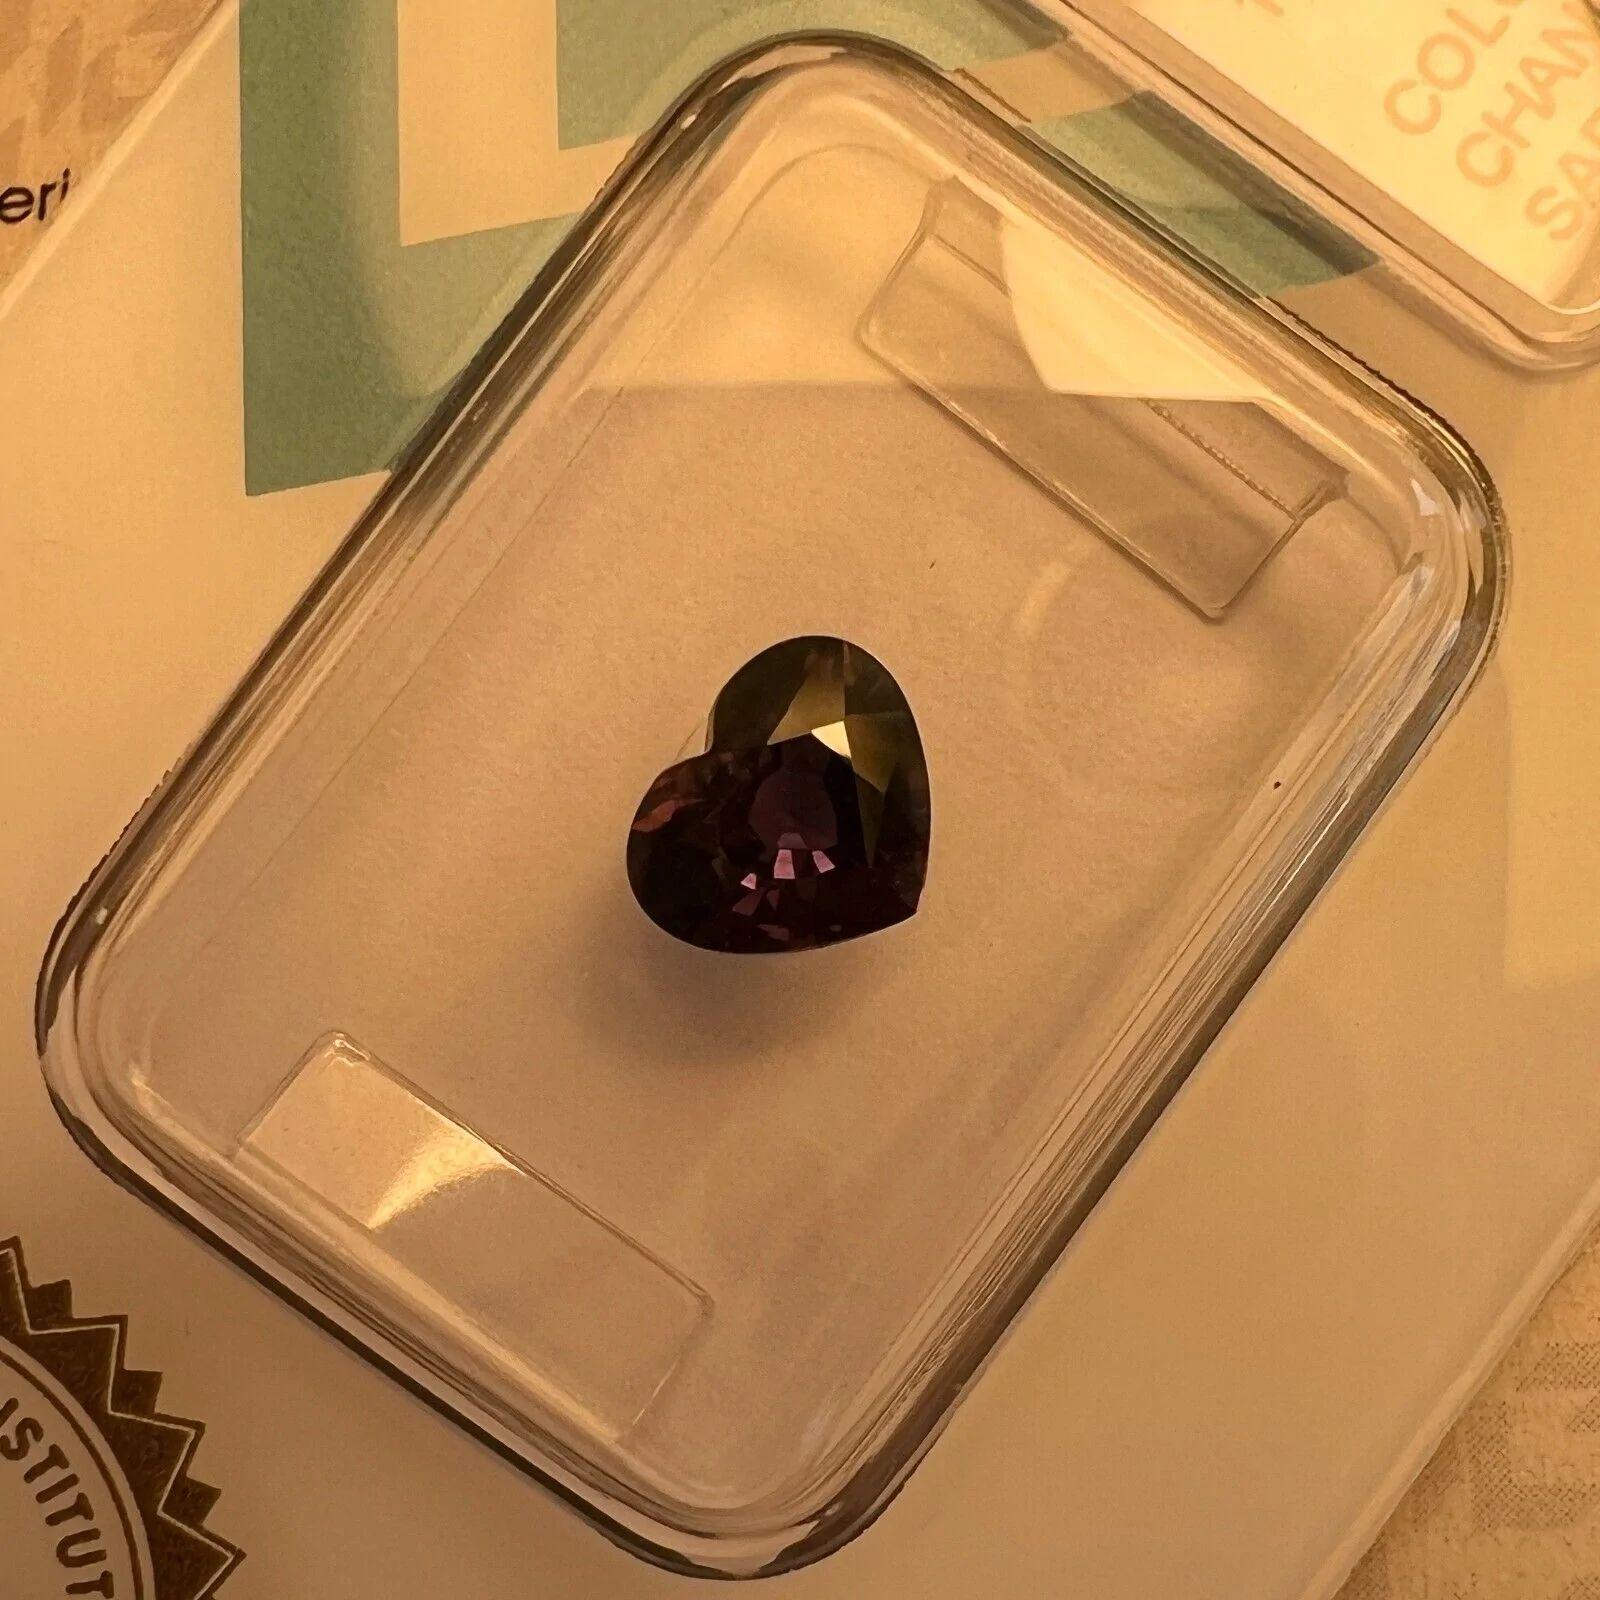 1.05ct Unheated Colour Change Heart Cut Sapphire Deep Purple Blue IGI Certified

Rare Untreated Colour Change Sapphire Gemstone.
1.05 Carat unheated sapphire with a rare colour change effect. Changing colour depending on the light its viewed in.